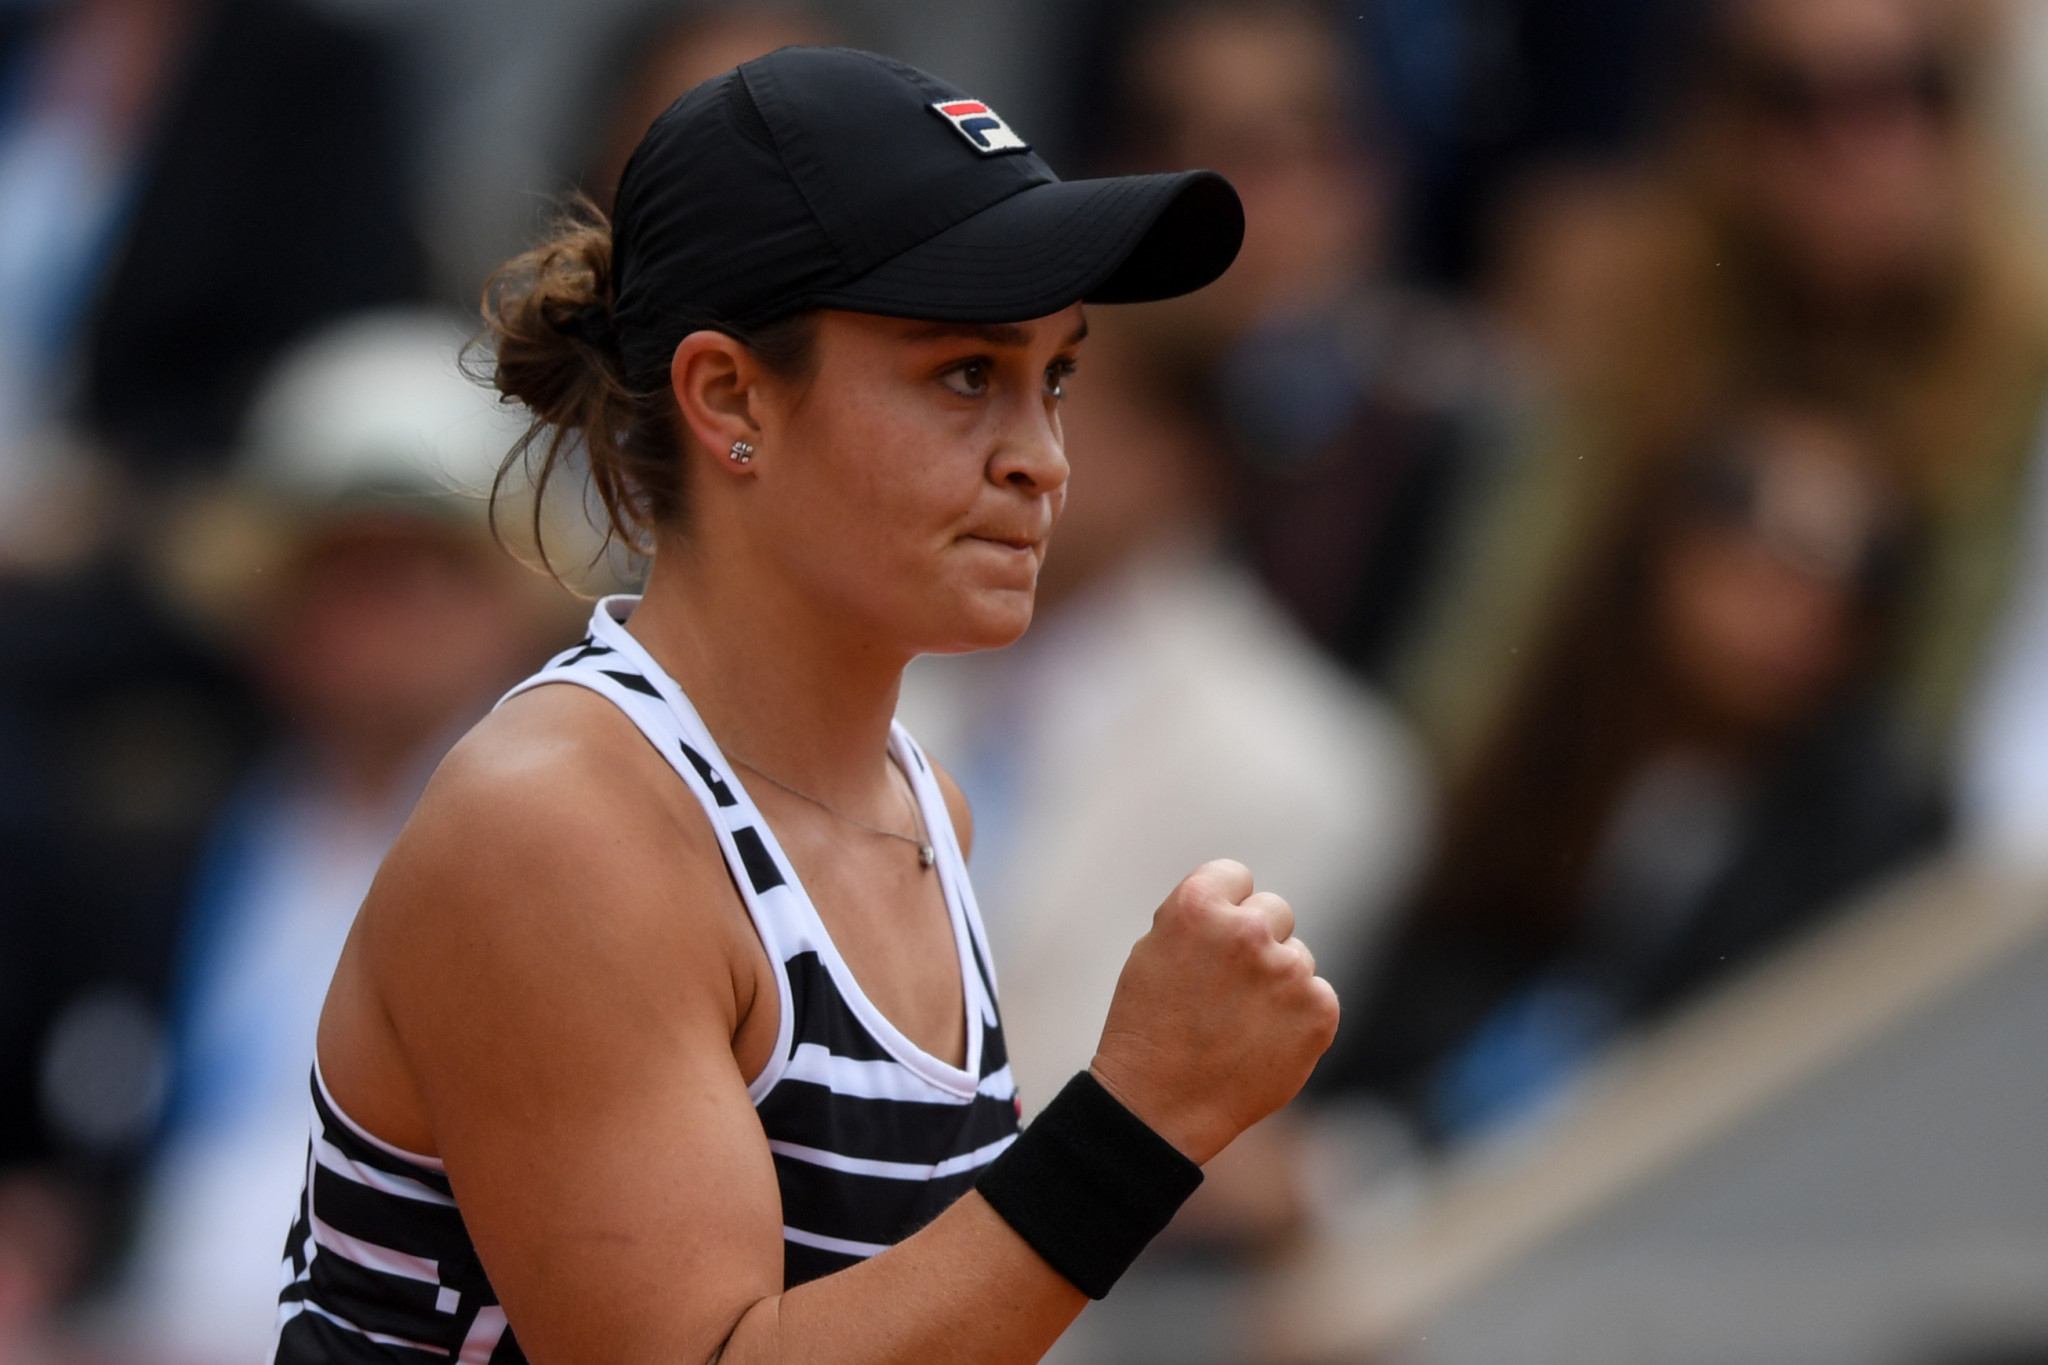 Eighth seed Barty pumps a fist after getting a crucial point in the women's French Open final ©Getty Images